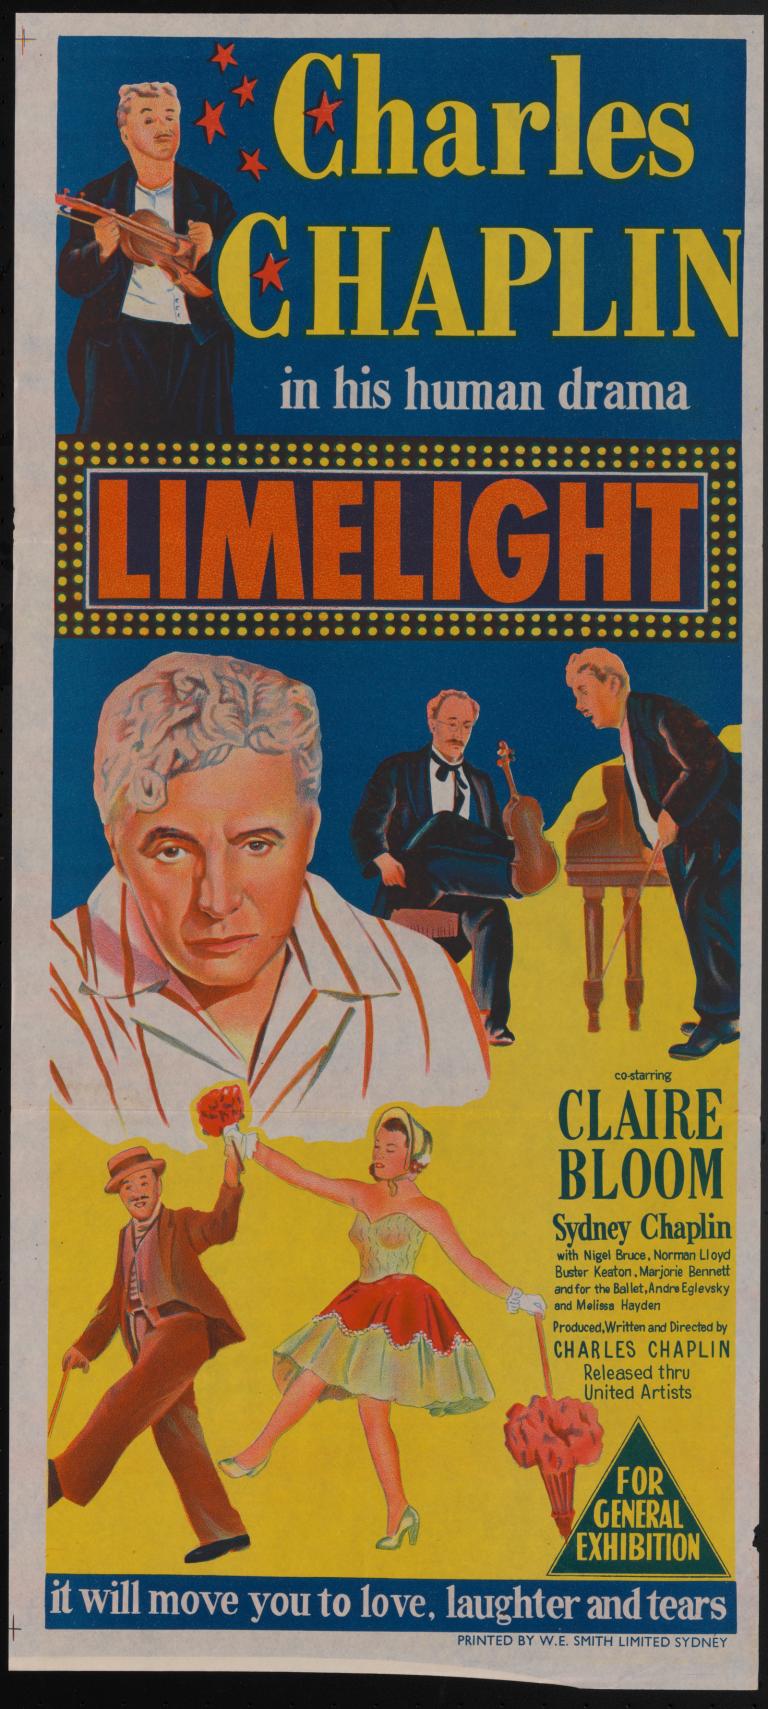 Poster for a film titled Limelight, starring Charles Chaplin